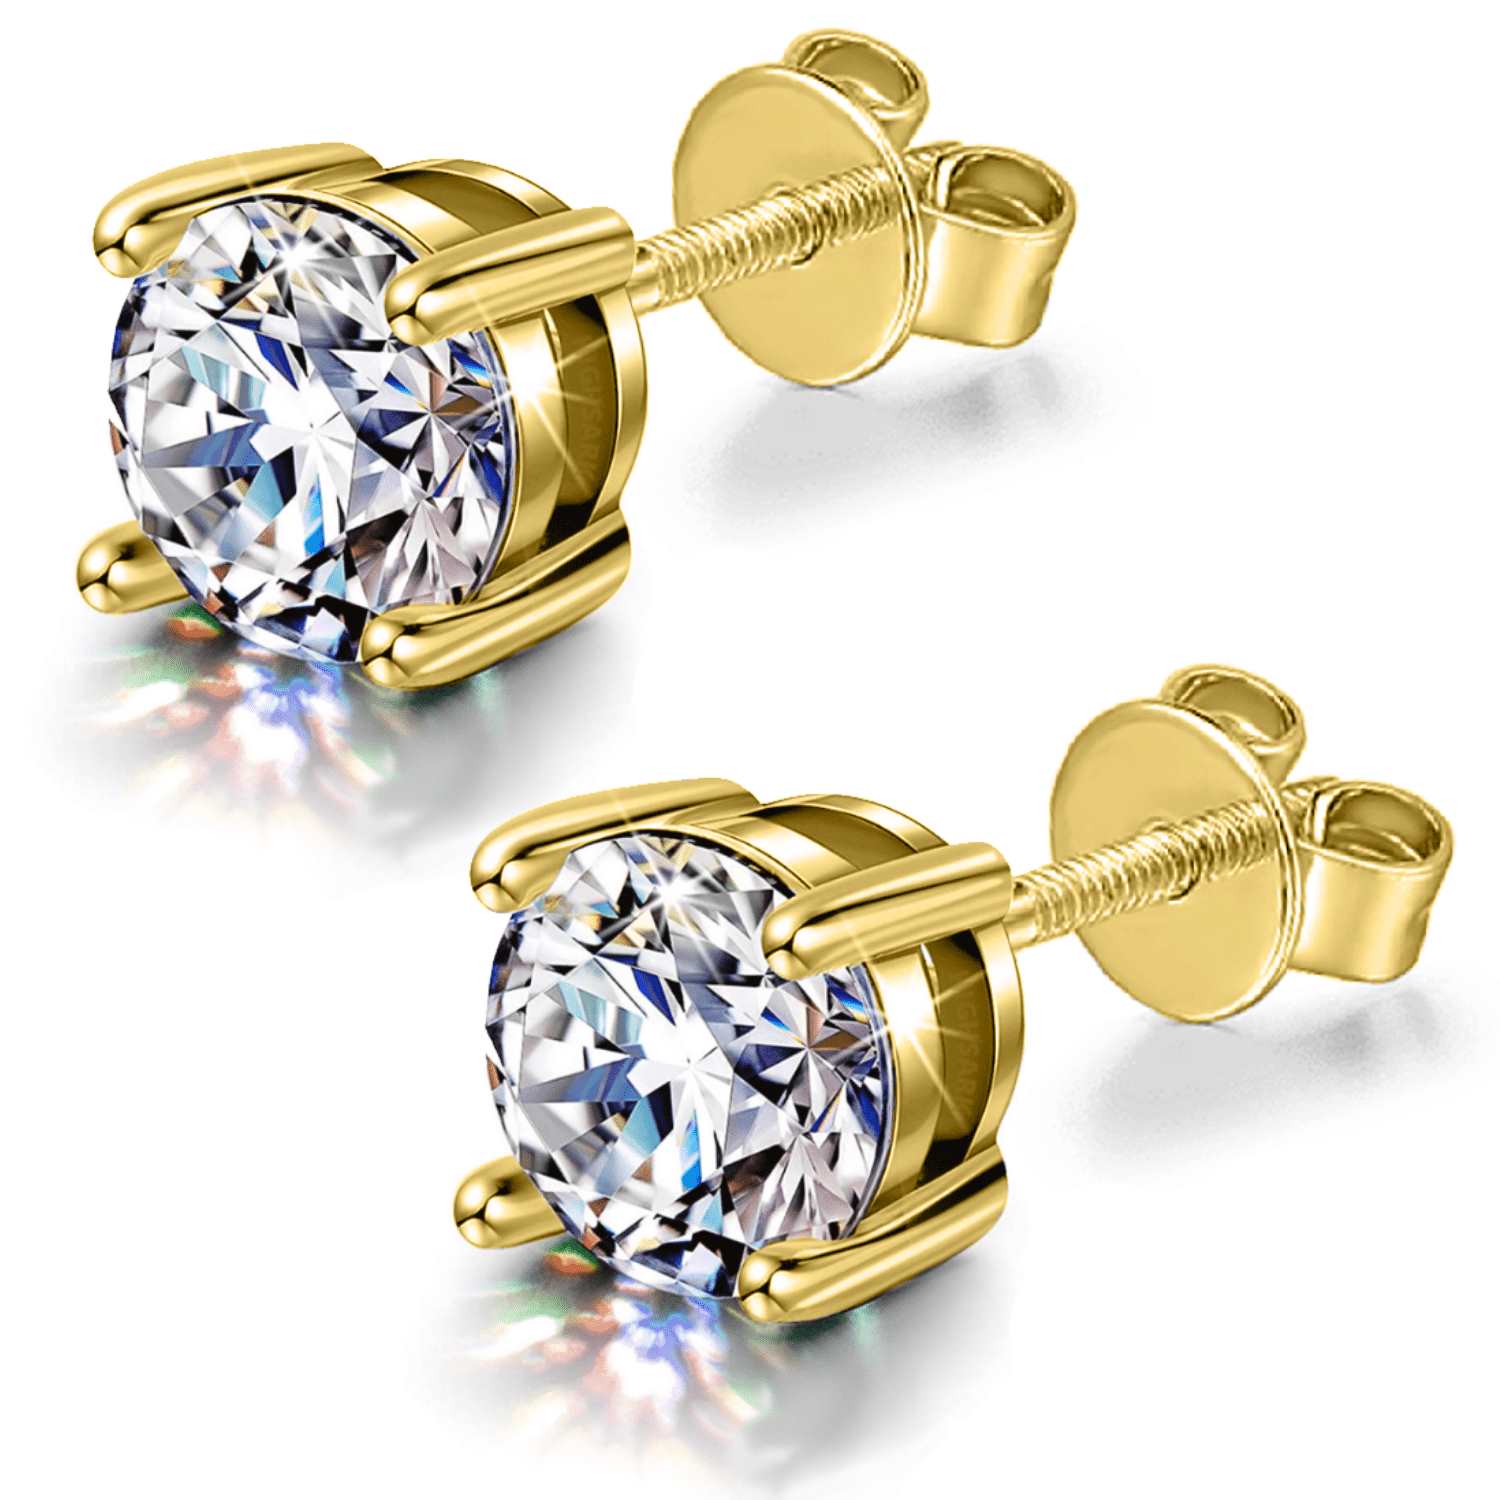 Gold Solitaire Earrings Screwback in 92.5 Silver embellished with Swarovski Zirconia - 92.5 Silver in 18K Gold Finish